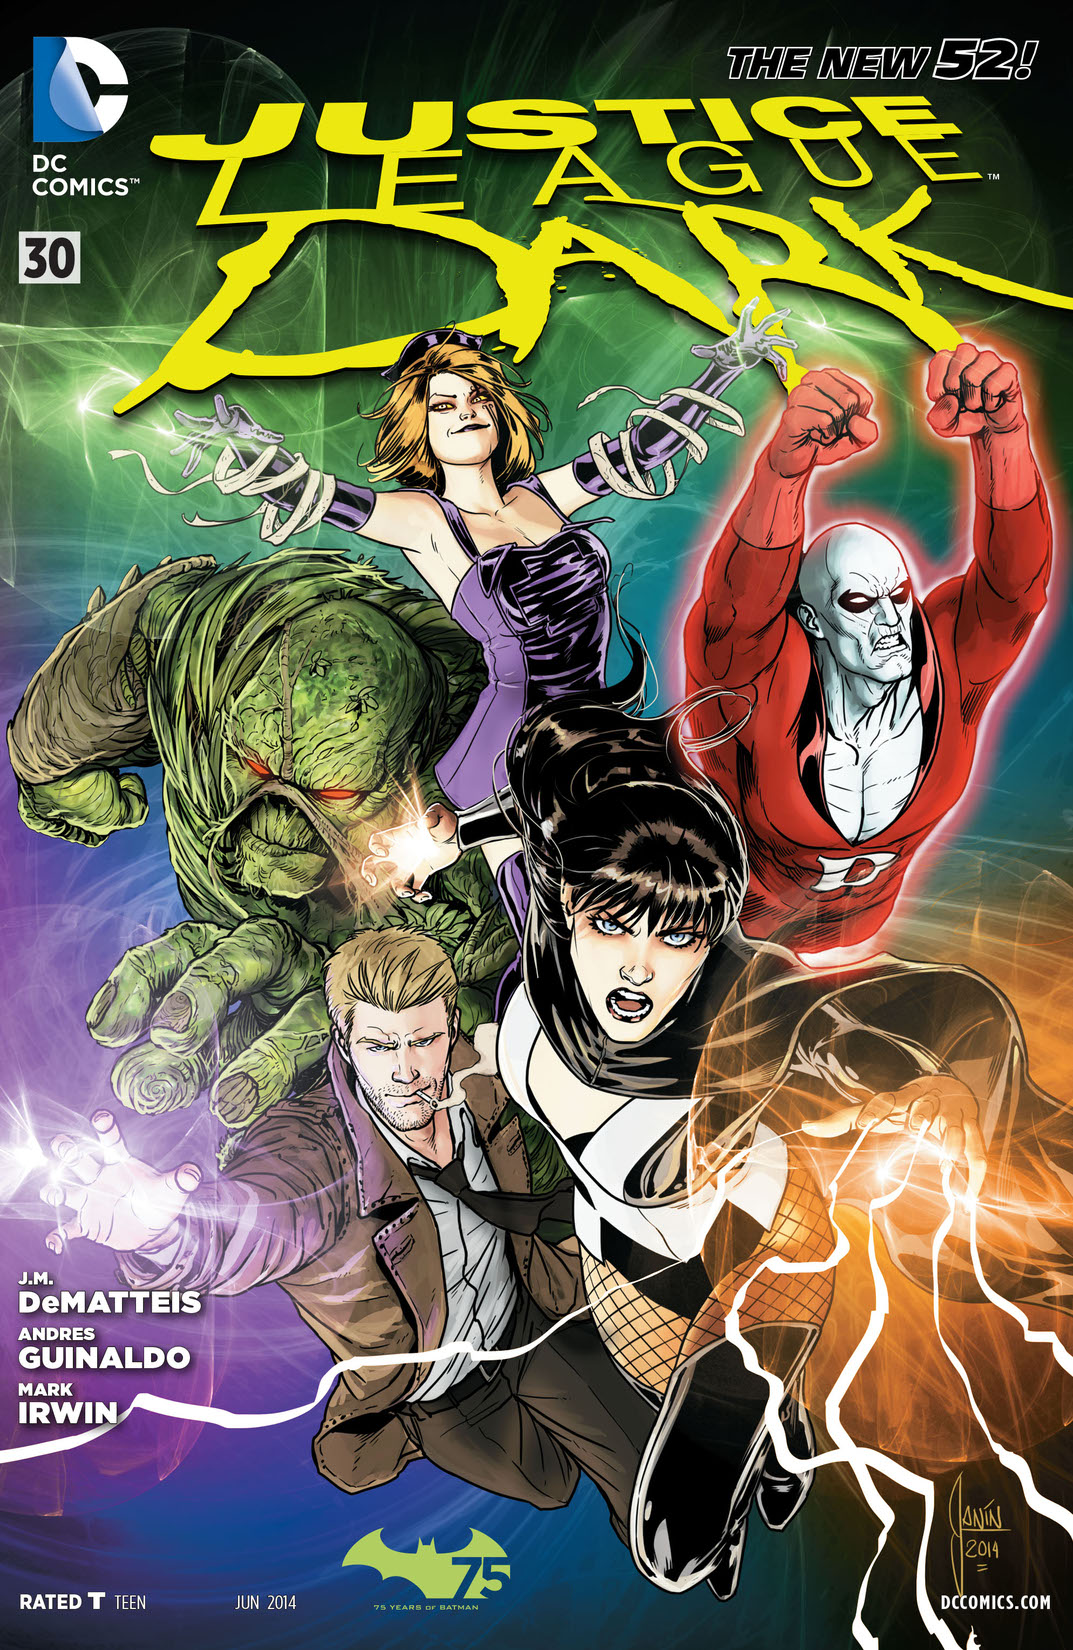 Justice League Dark (2011-) #30 preview images